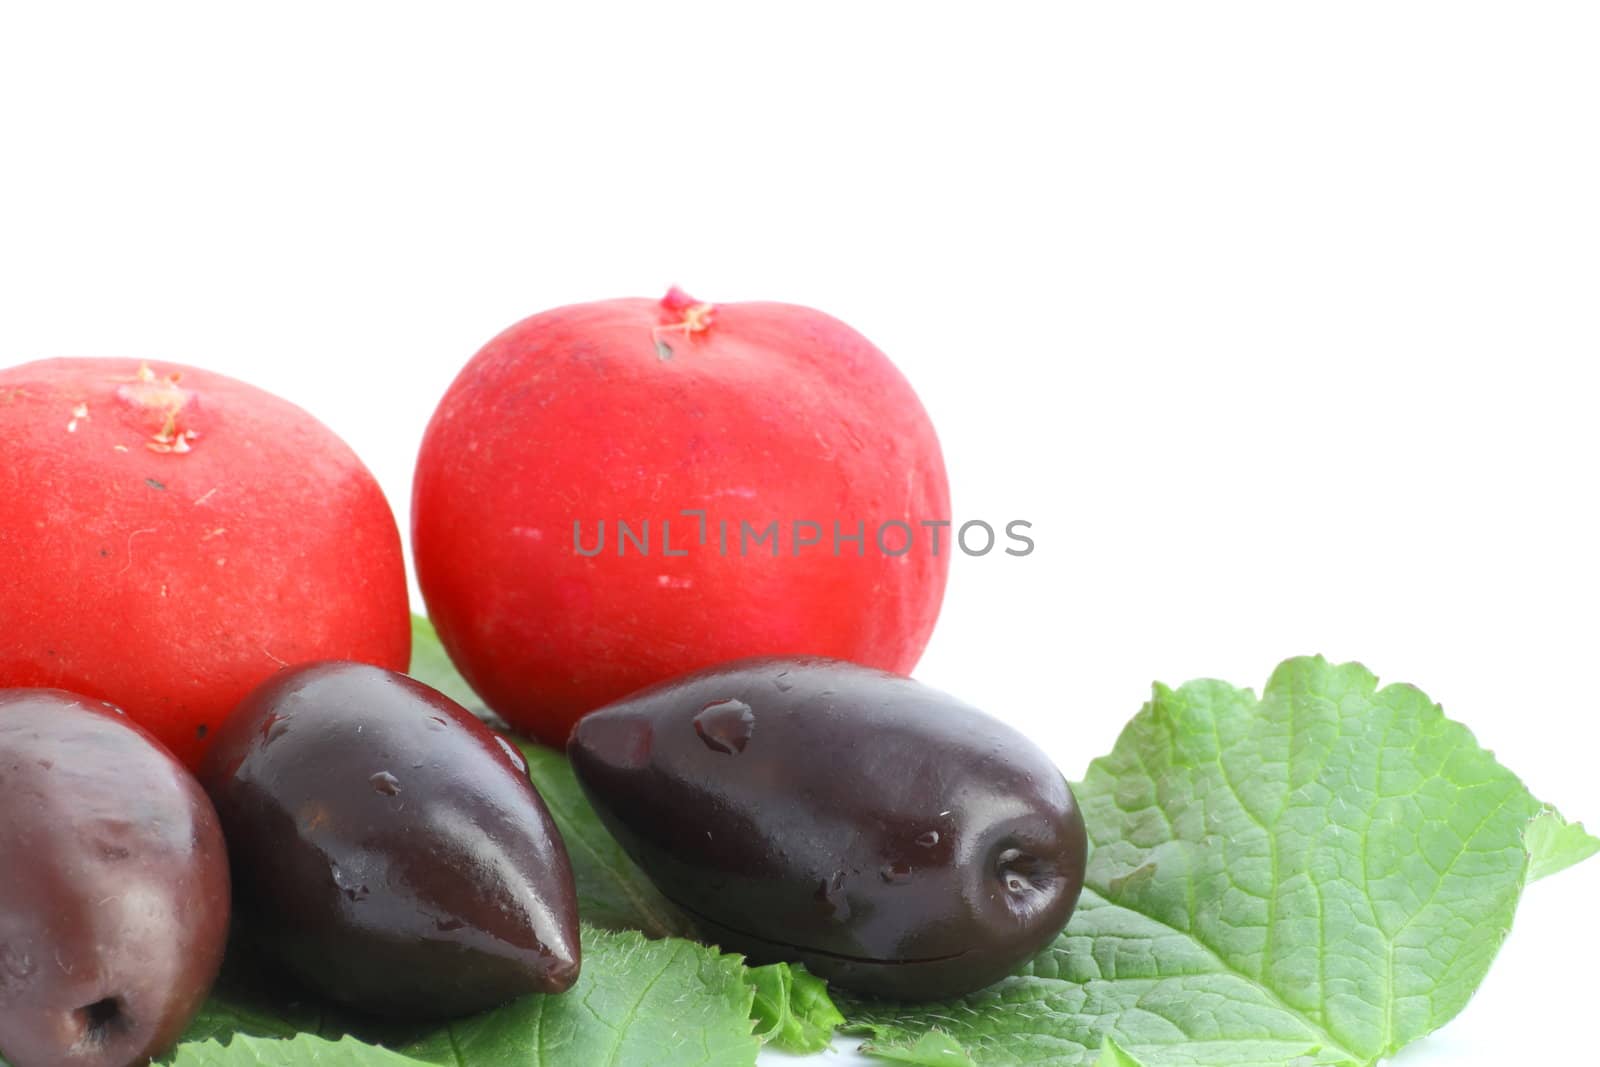 kalamata olives and red radishes on a green leaf